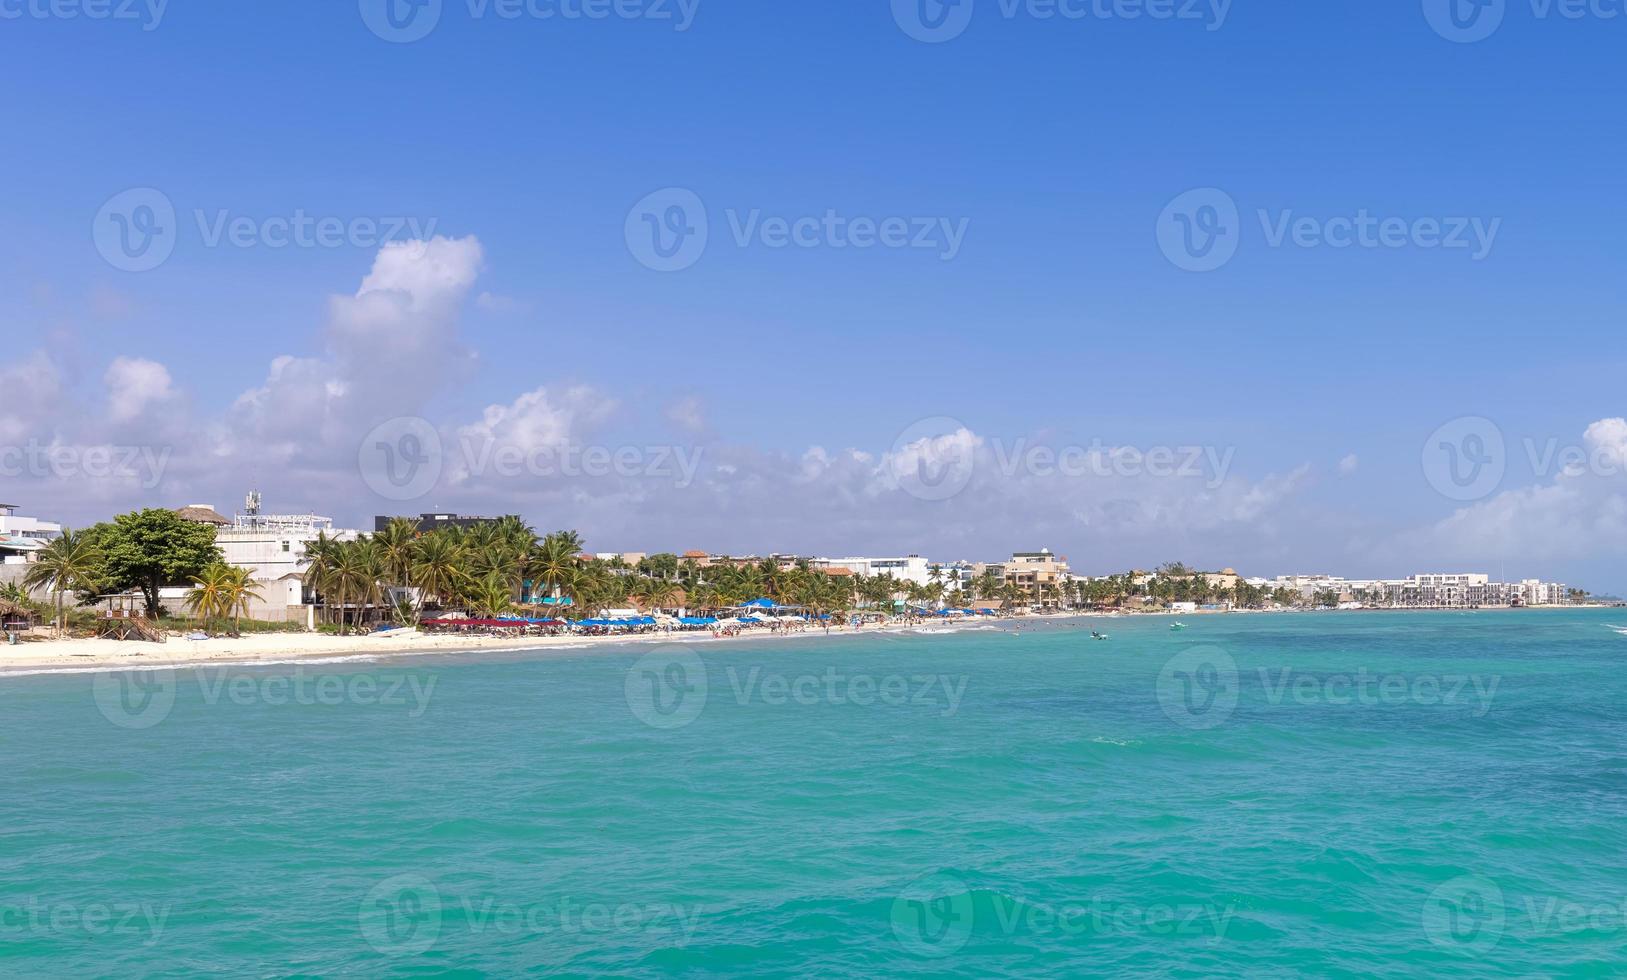 Mexico scenic beaches playas and hotels of Playa del Carmen, a popular tourism vacation destination photo